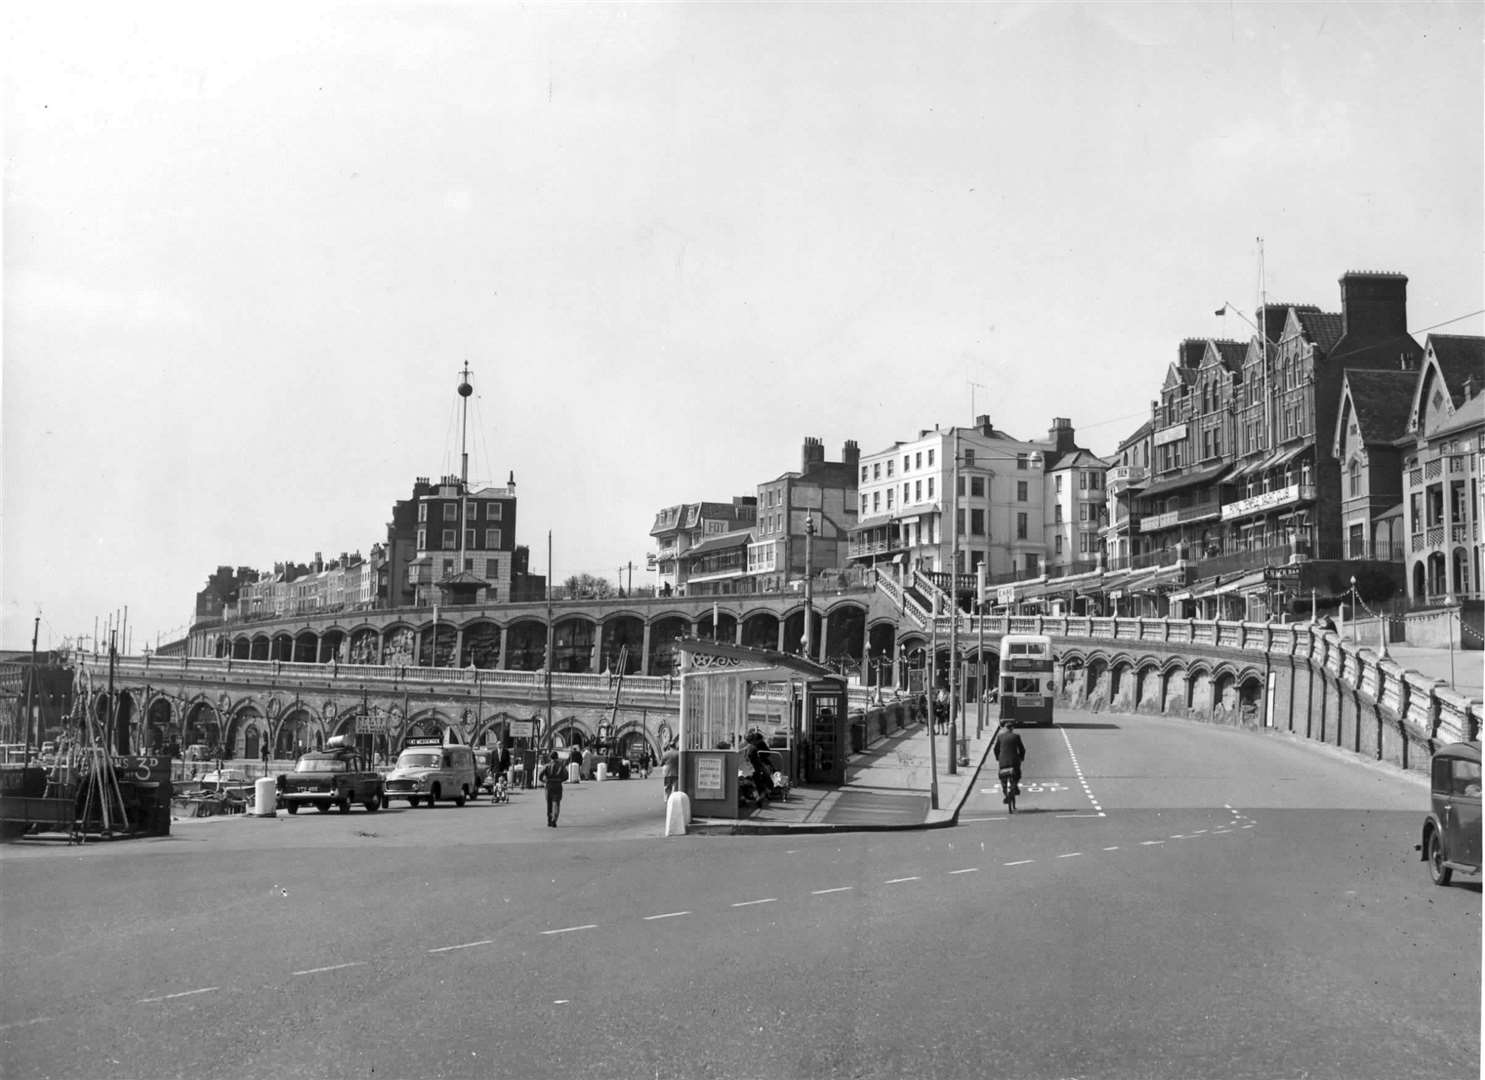 Ramsgate seafront in 1958